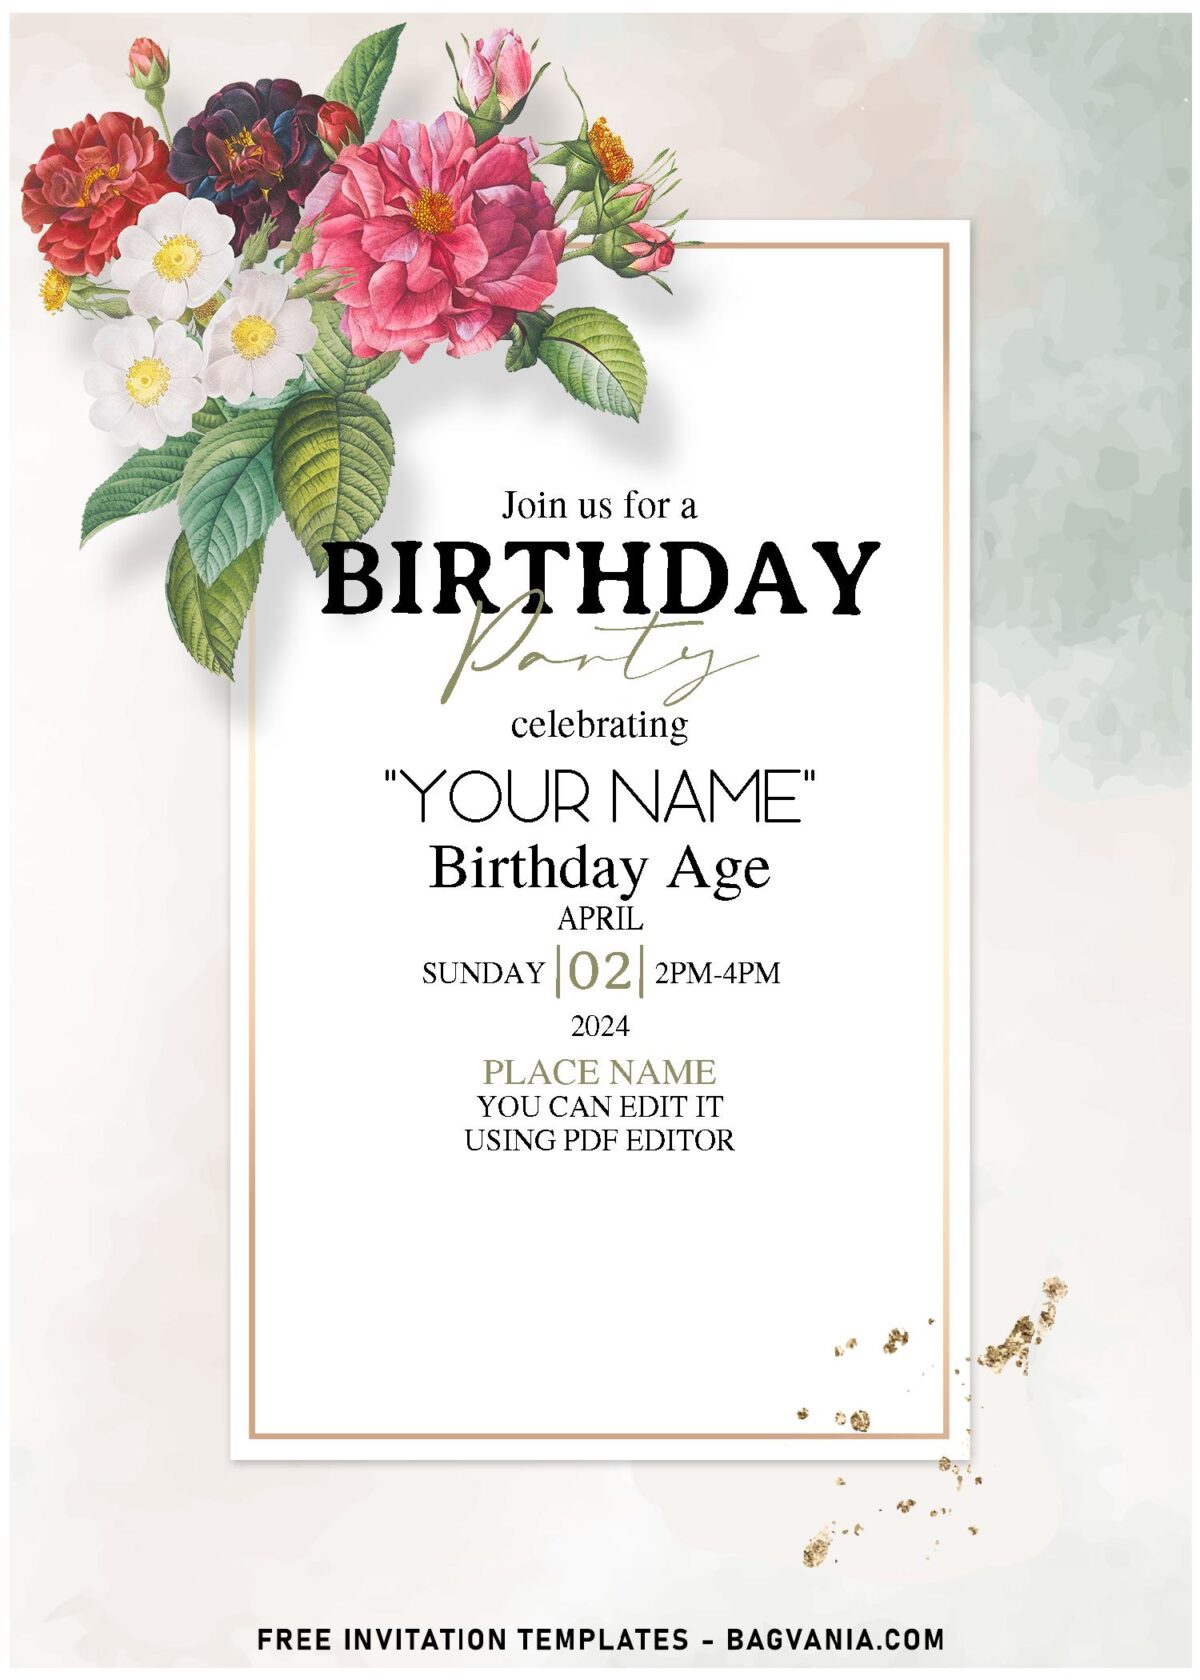 (Free Editable PDF) Dusty Bright And Moody Garden Rose Birthday Invitation Templates with white rose